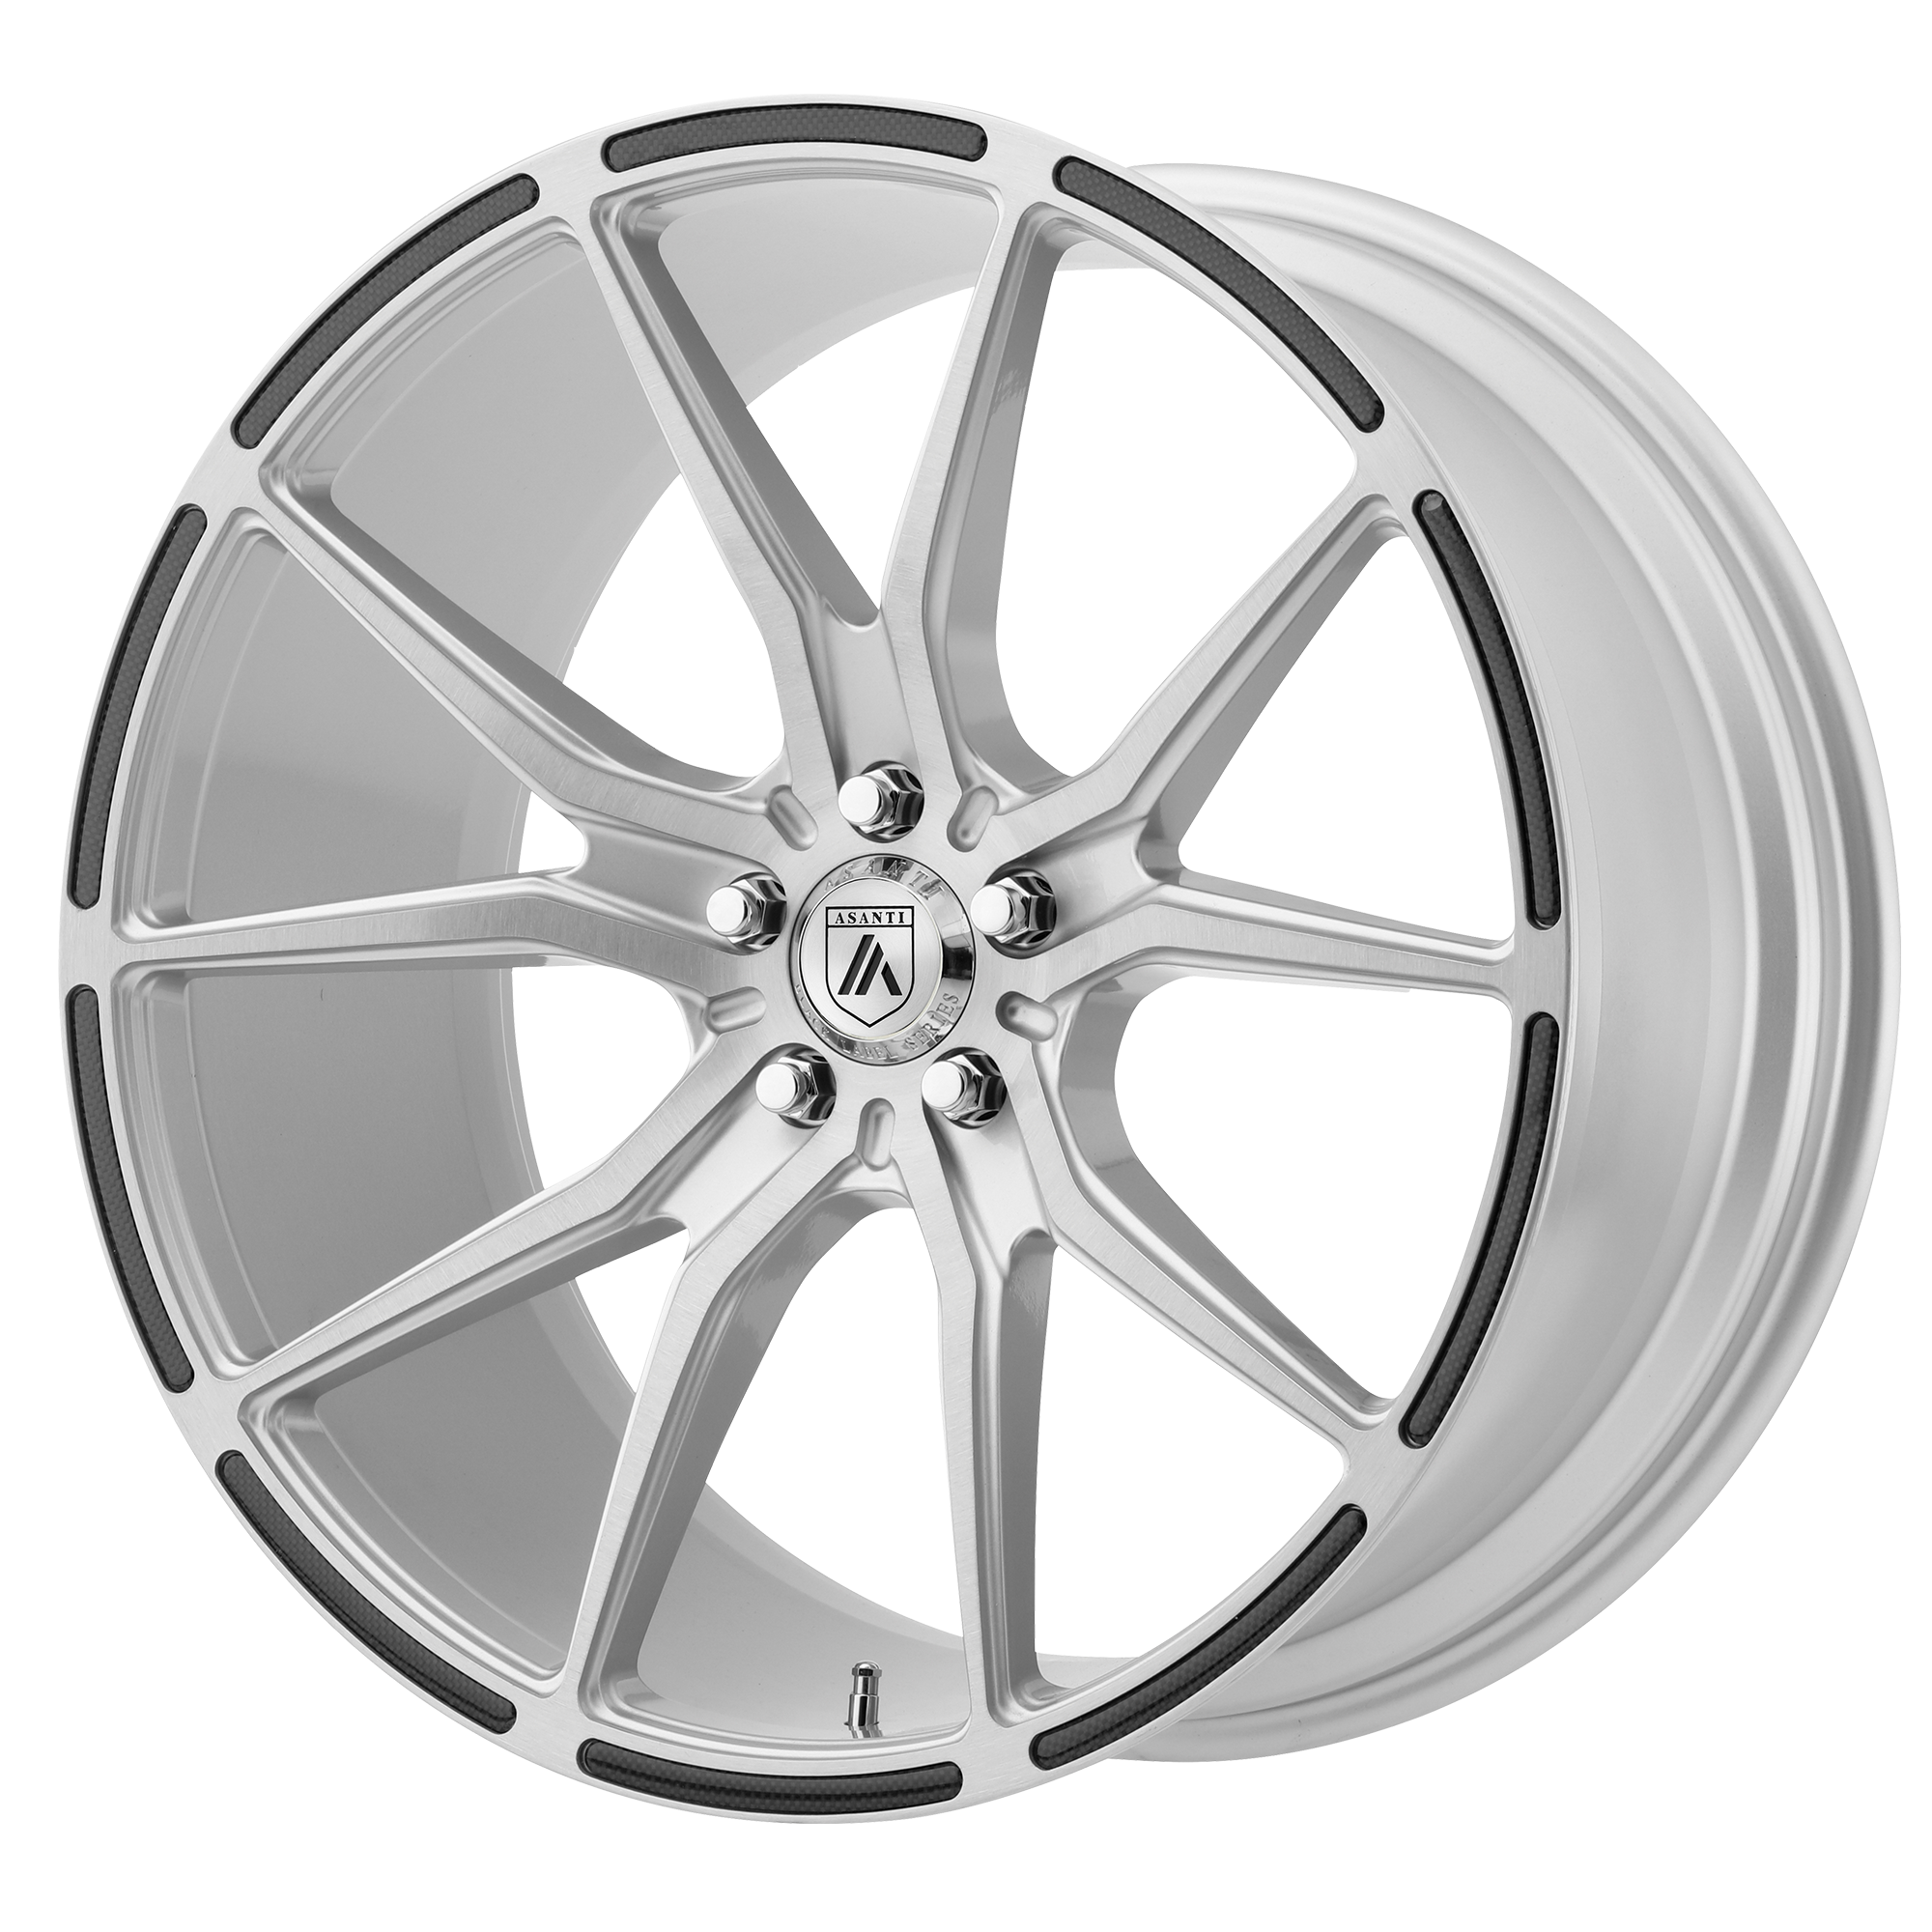 VEGA 20x8.5 5x112.00 BRUSHED SILVER W/ CARBON FIBER INSERTS (38 mm) - Tires and Engine Performance